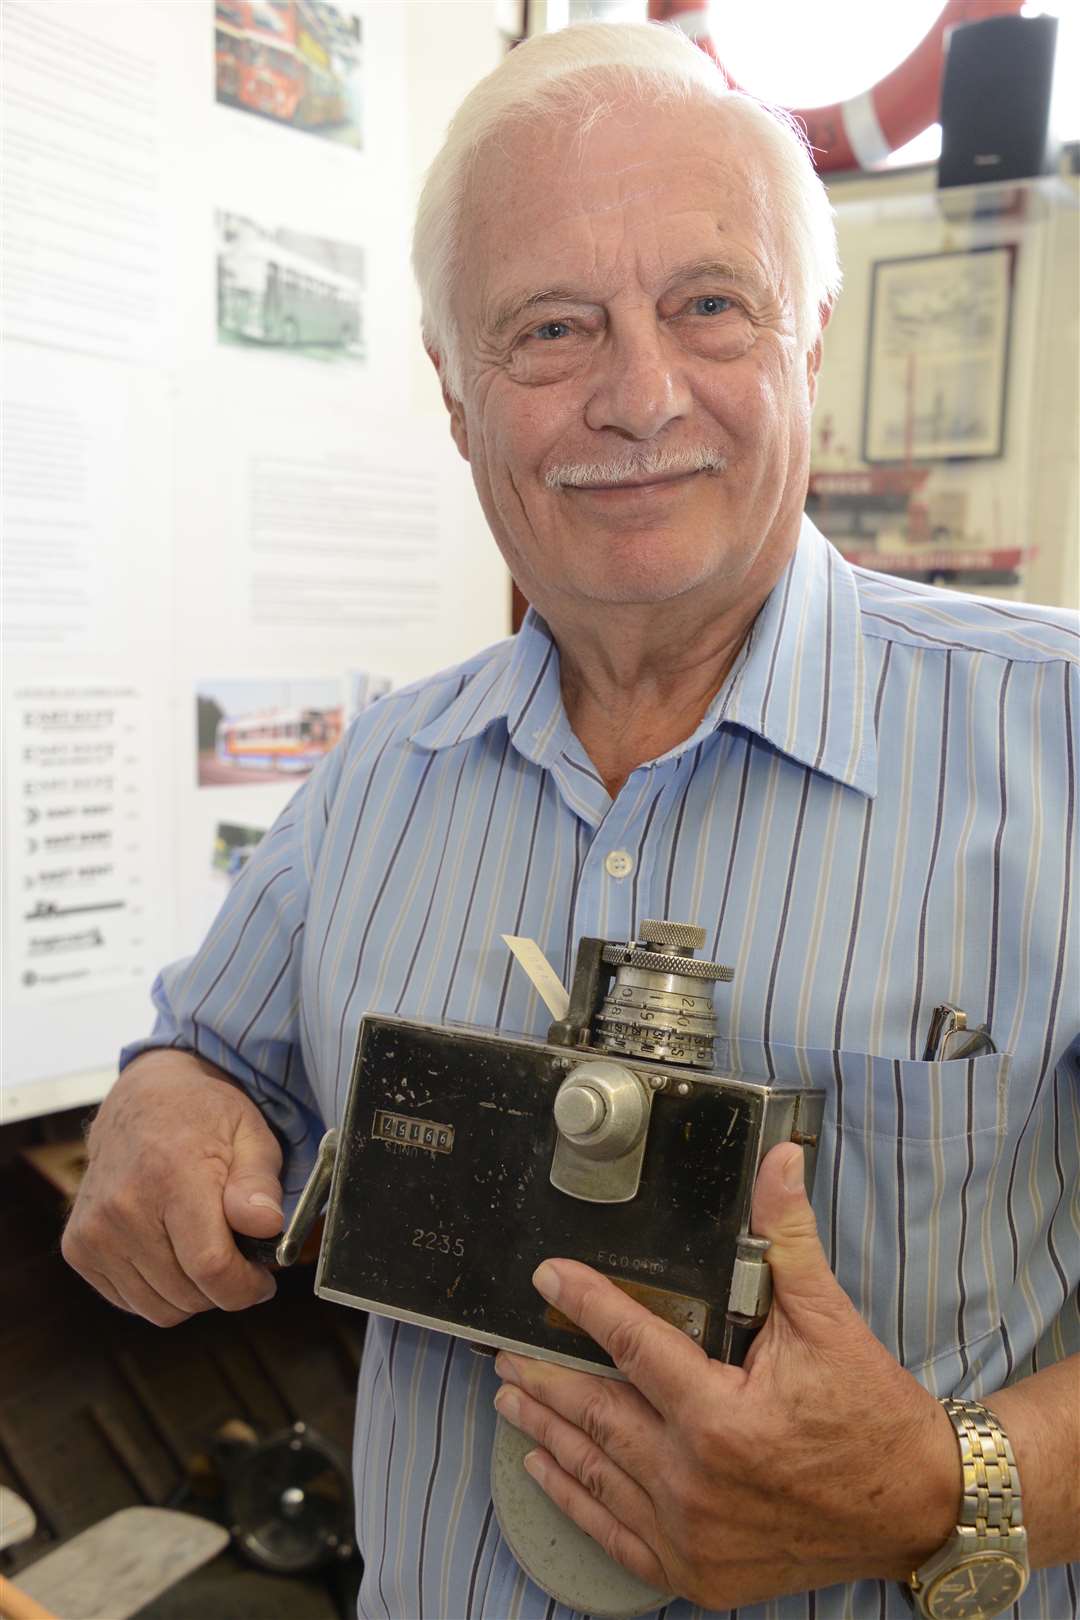 Deal Maritime and Heritage Museum East Kent Road Car Company exhibition organiser Alwyn Conway and a ticket machine